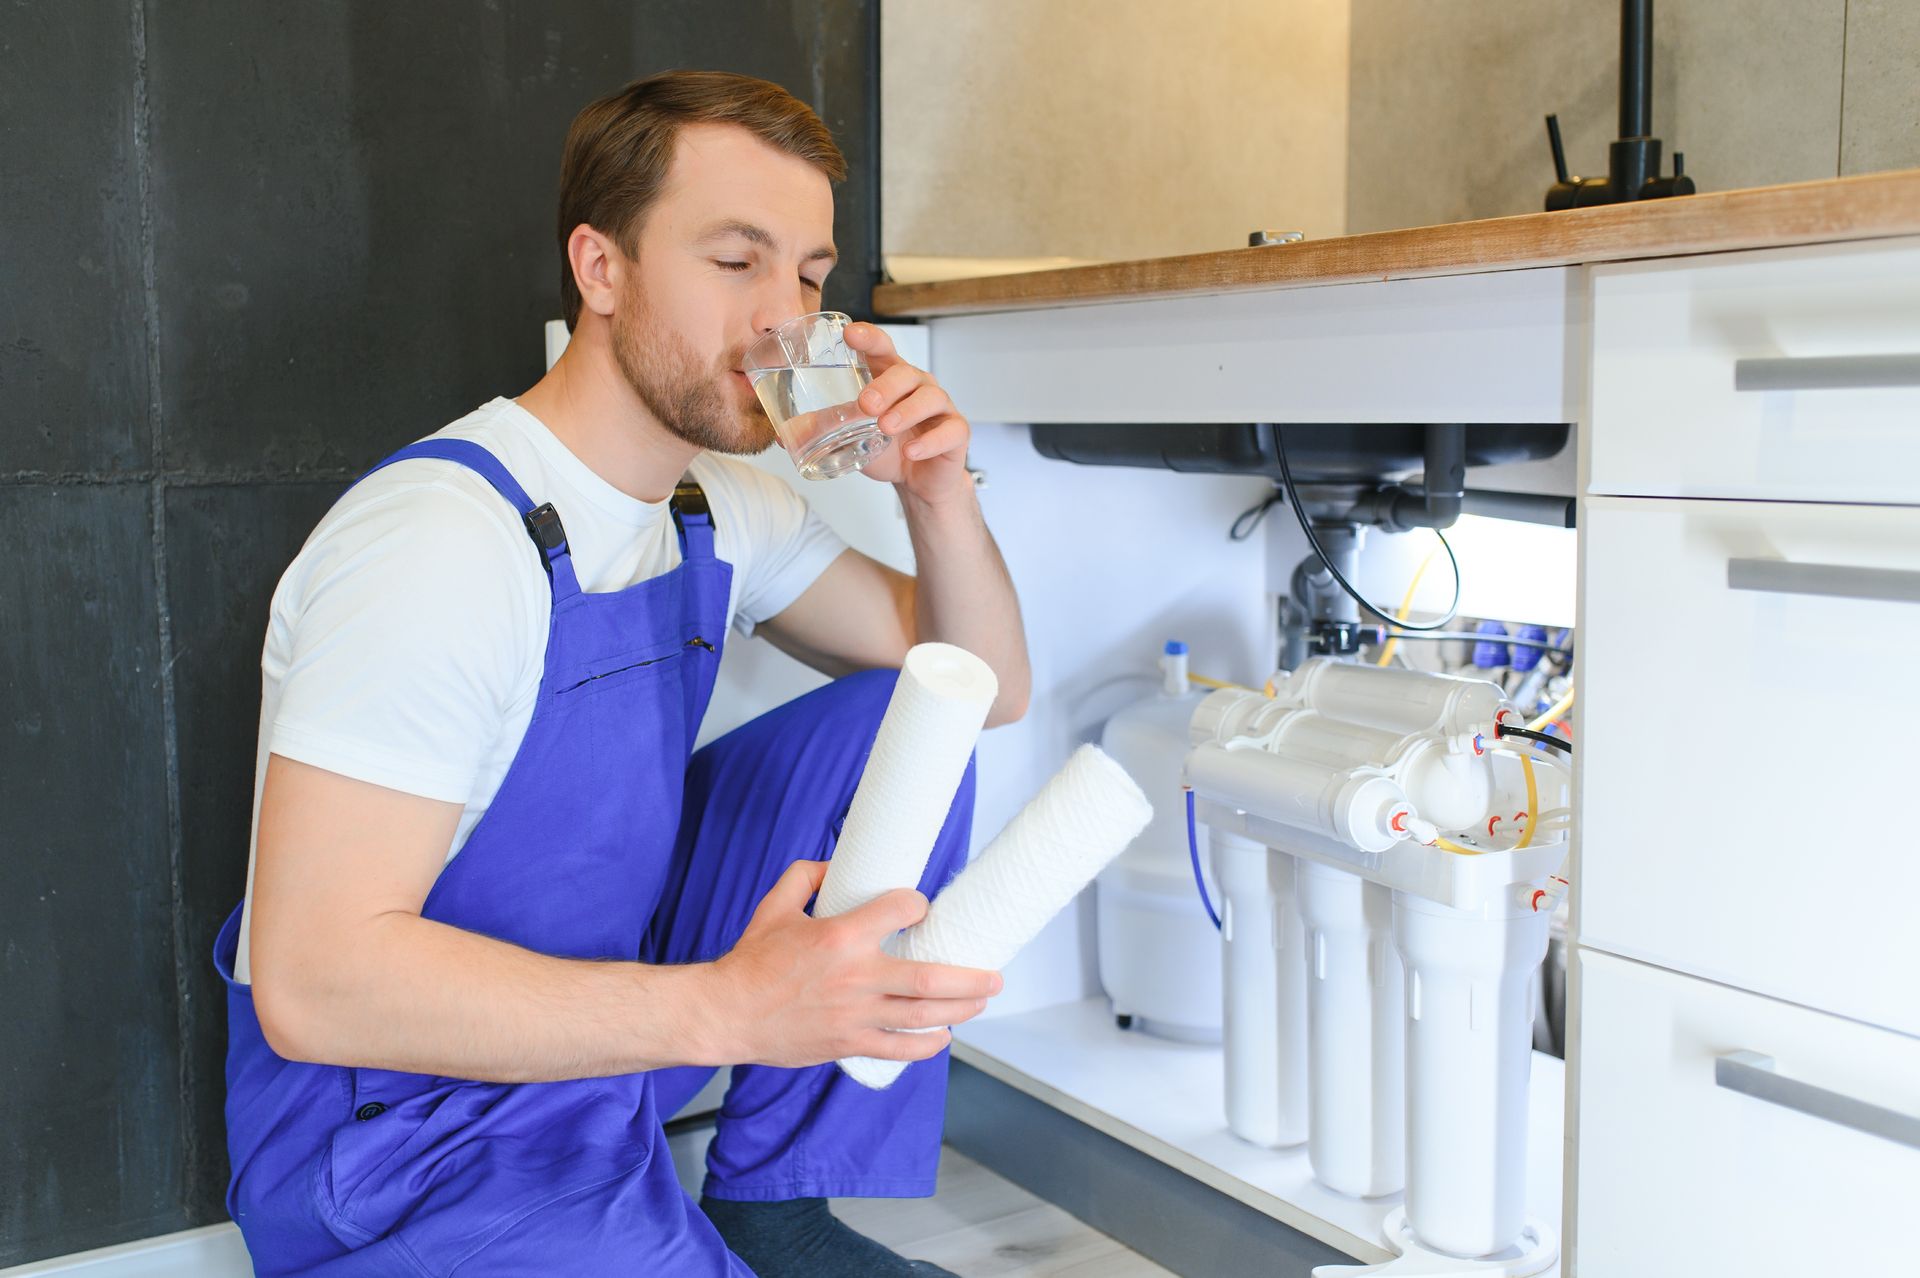 A man is drinking water from a glass while kneeling under a sink.